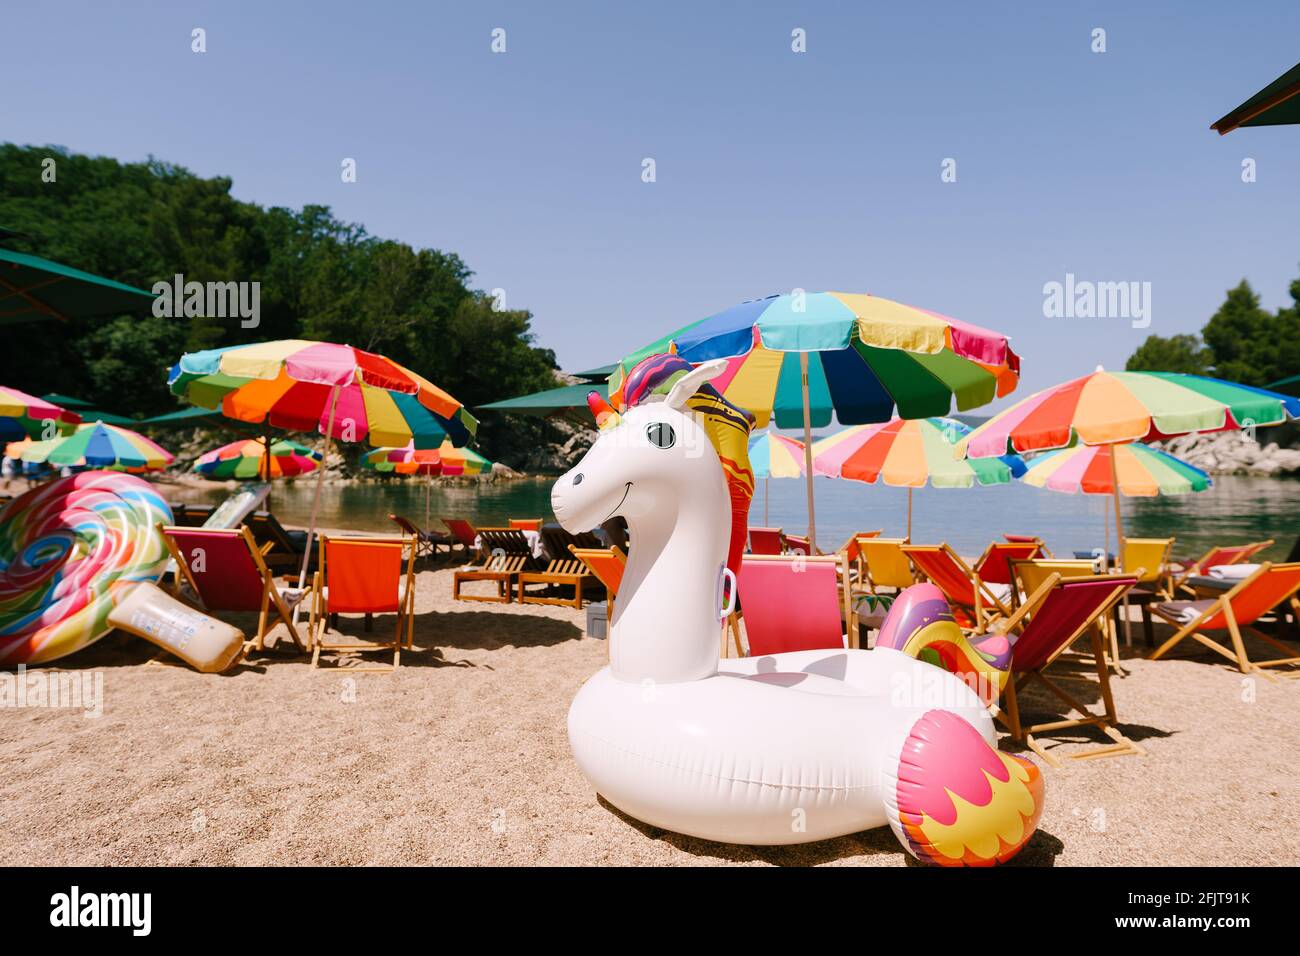 Inflatable white unicorn on the royal beach in Przno against the backdrop of green trees Stock Photo